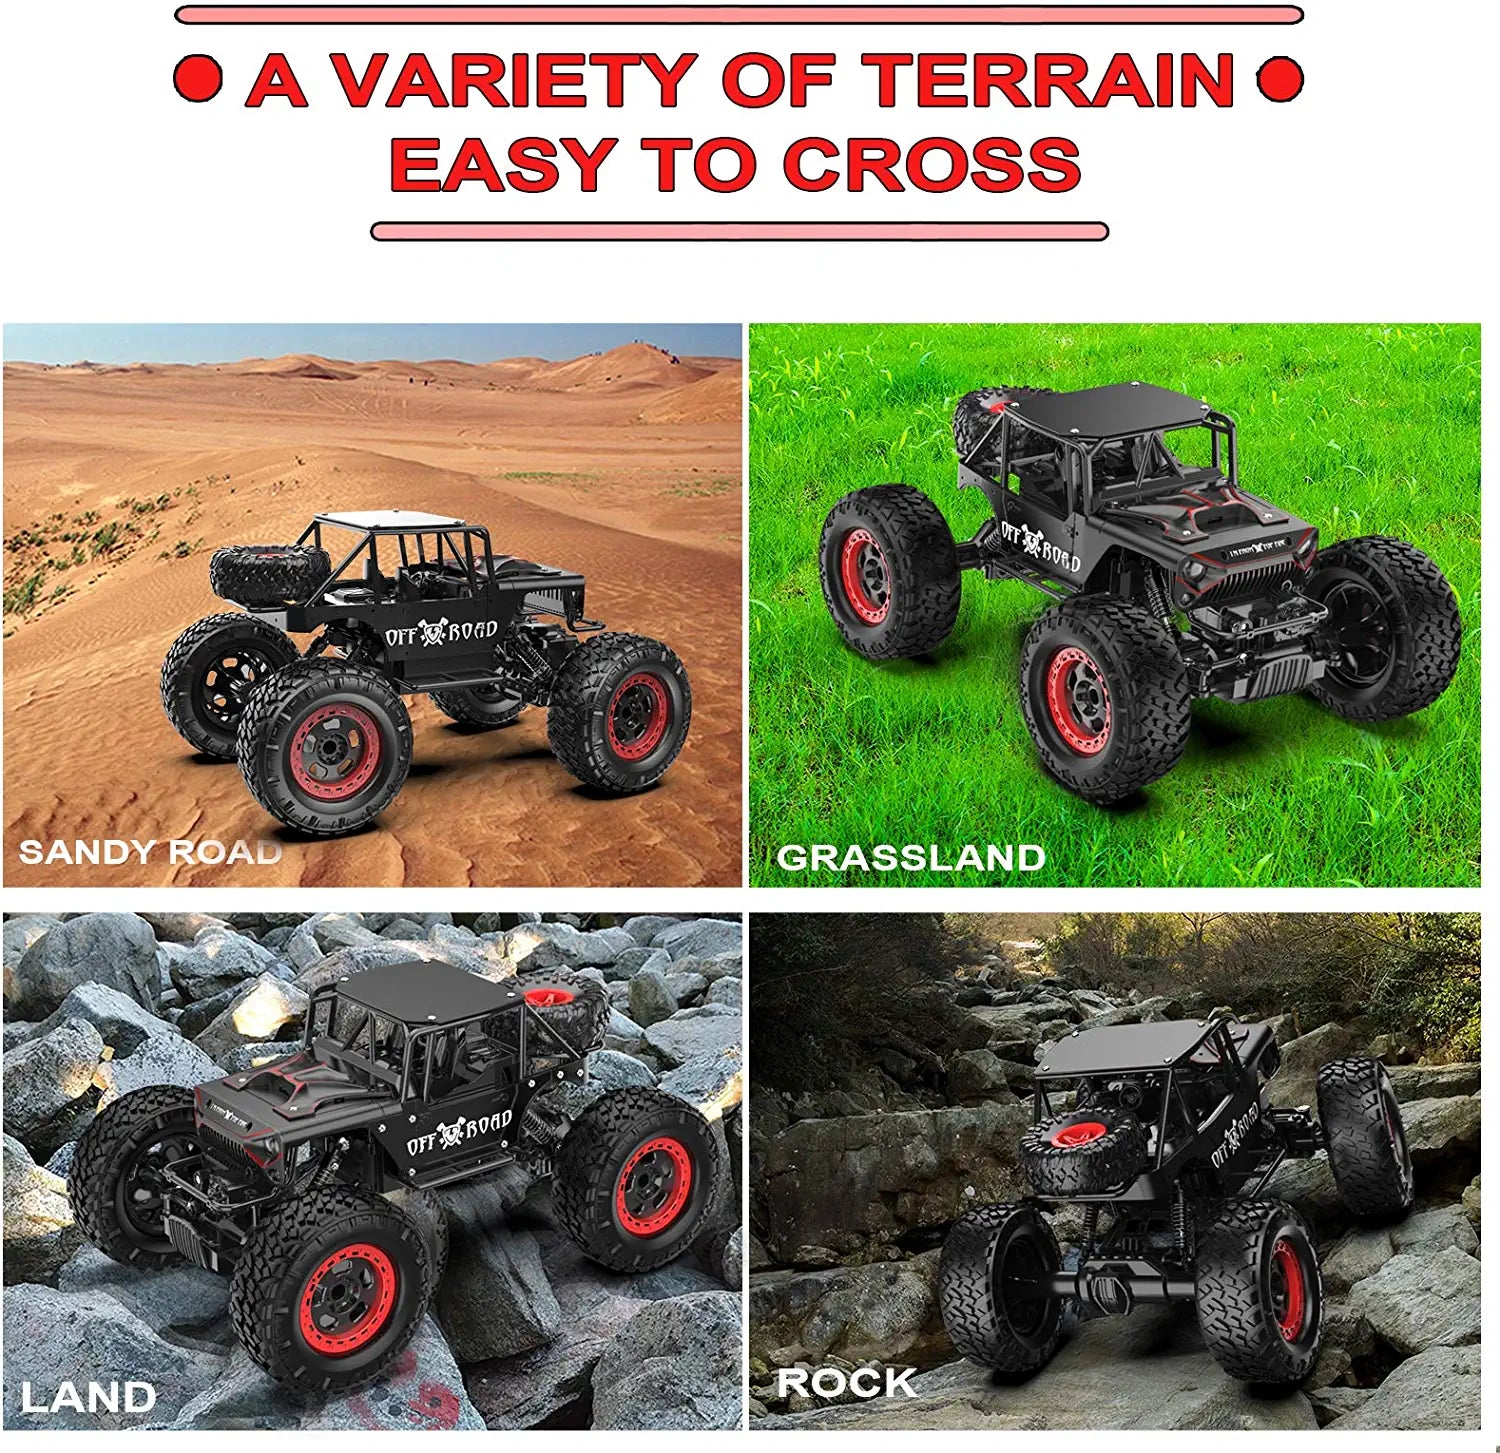 RC Cars,Remote Control Car for Kids Adults, 4WD Remote Control Monster Truck 1:12, 2.4Ghz Dual Motors LED Headlight Rc Rock Crawler, Remote Control Truck